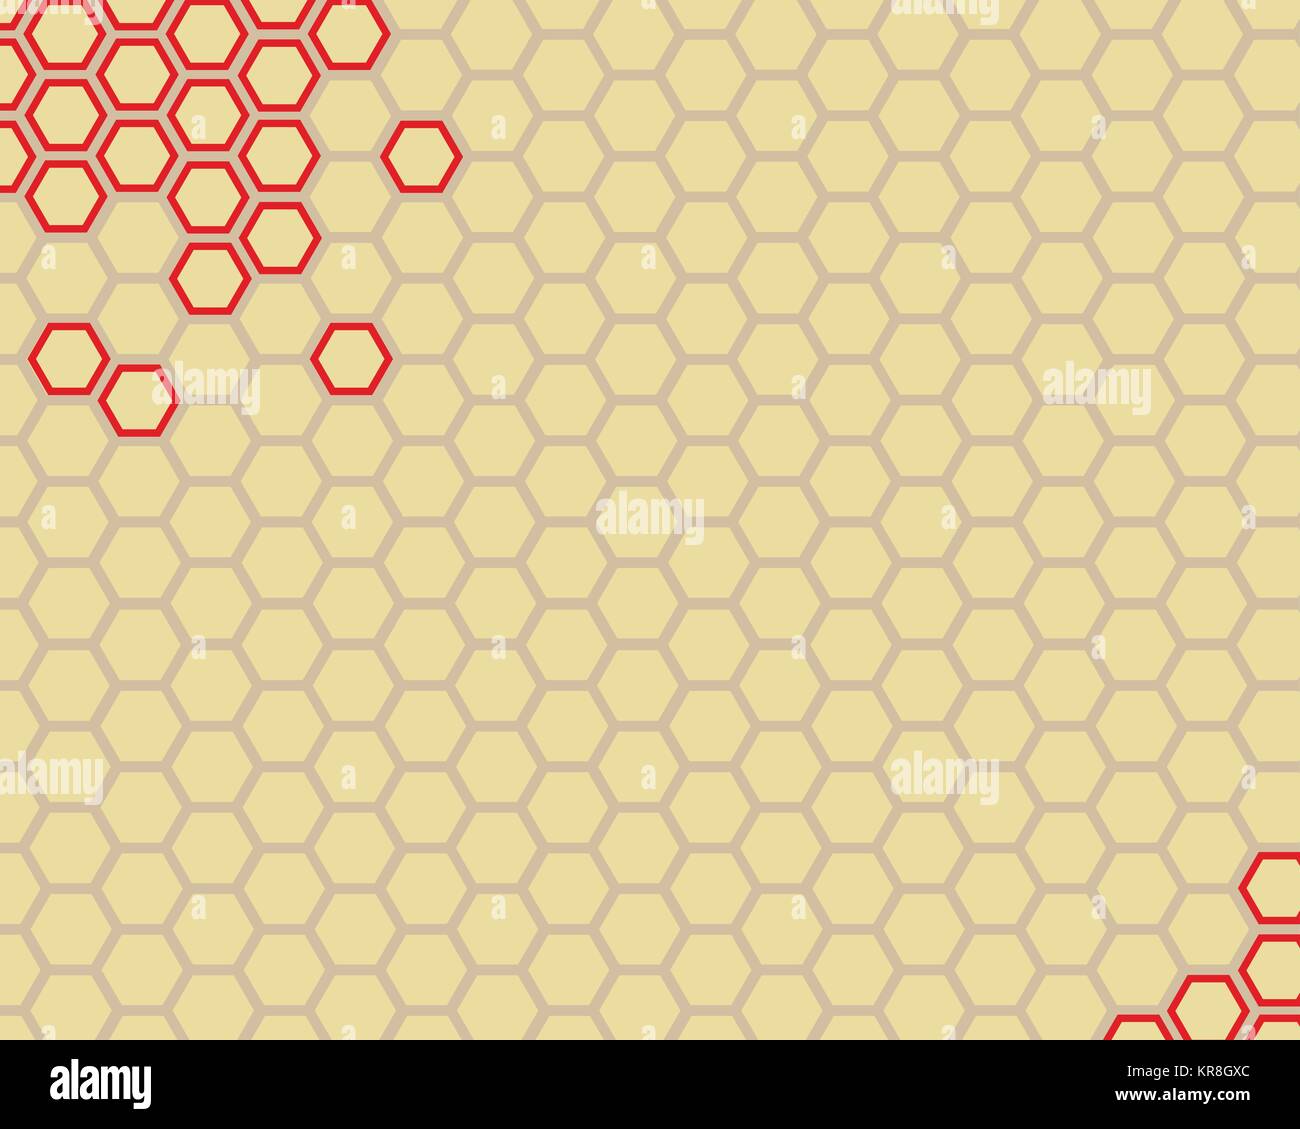 Cells of mobile communication. Background in the form of honeycomb. Stock Vector